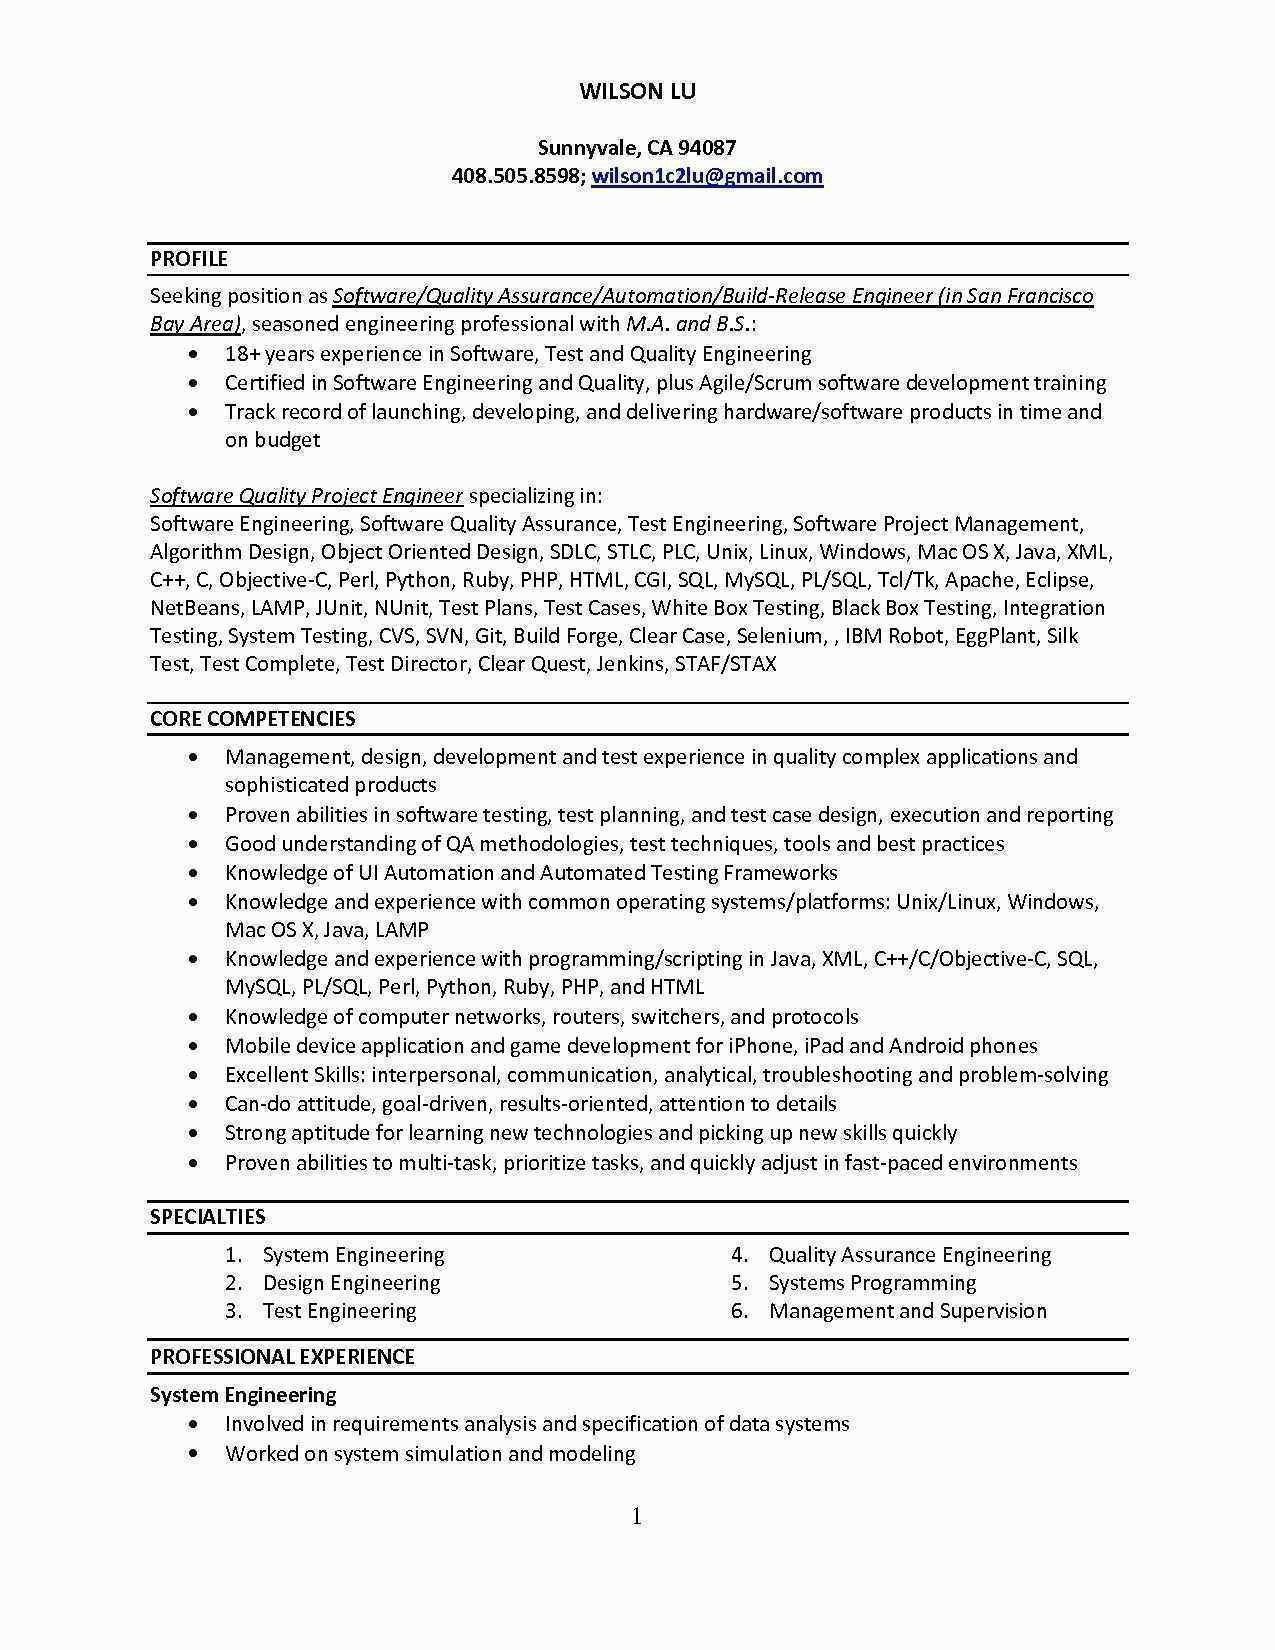 Sample Resume for software Engineer with 5 Years Experience 5 Years Experience software Engineer Resume Best Resume